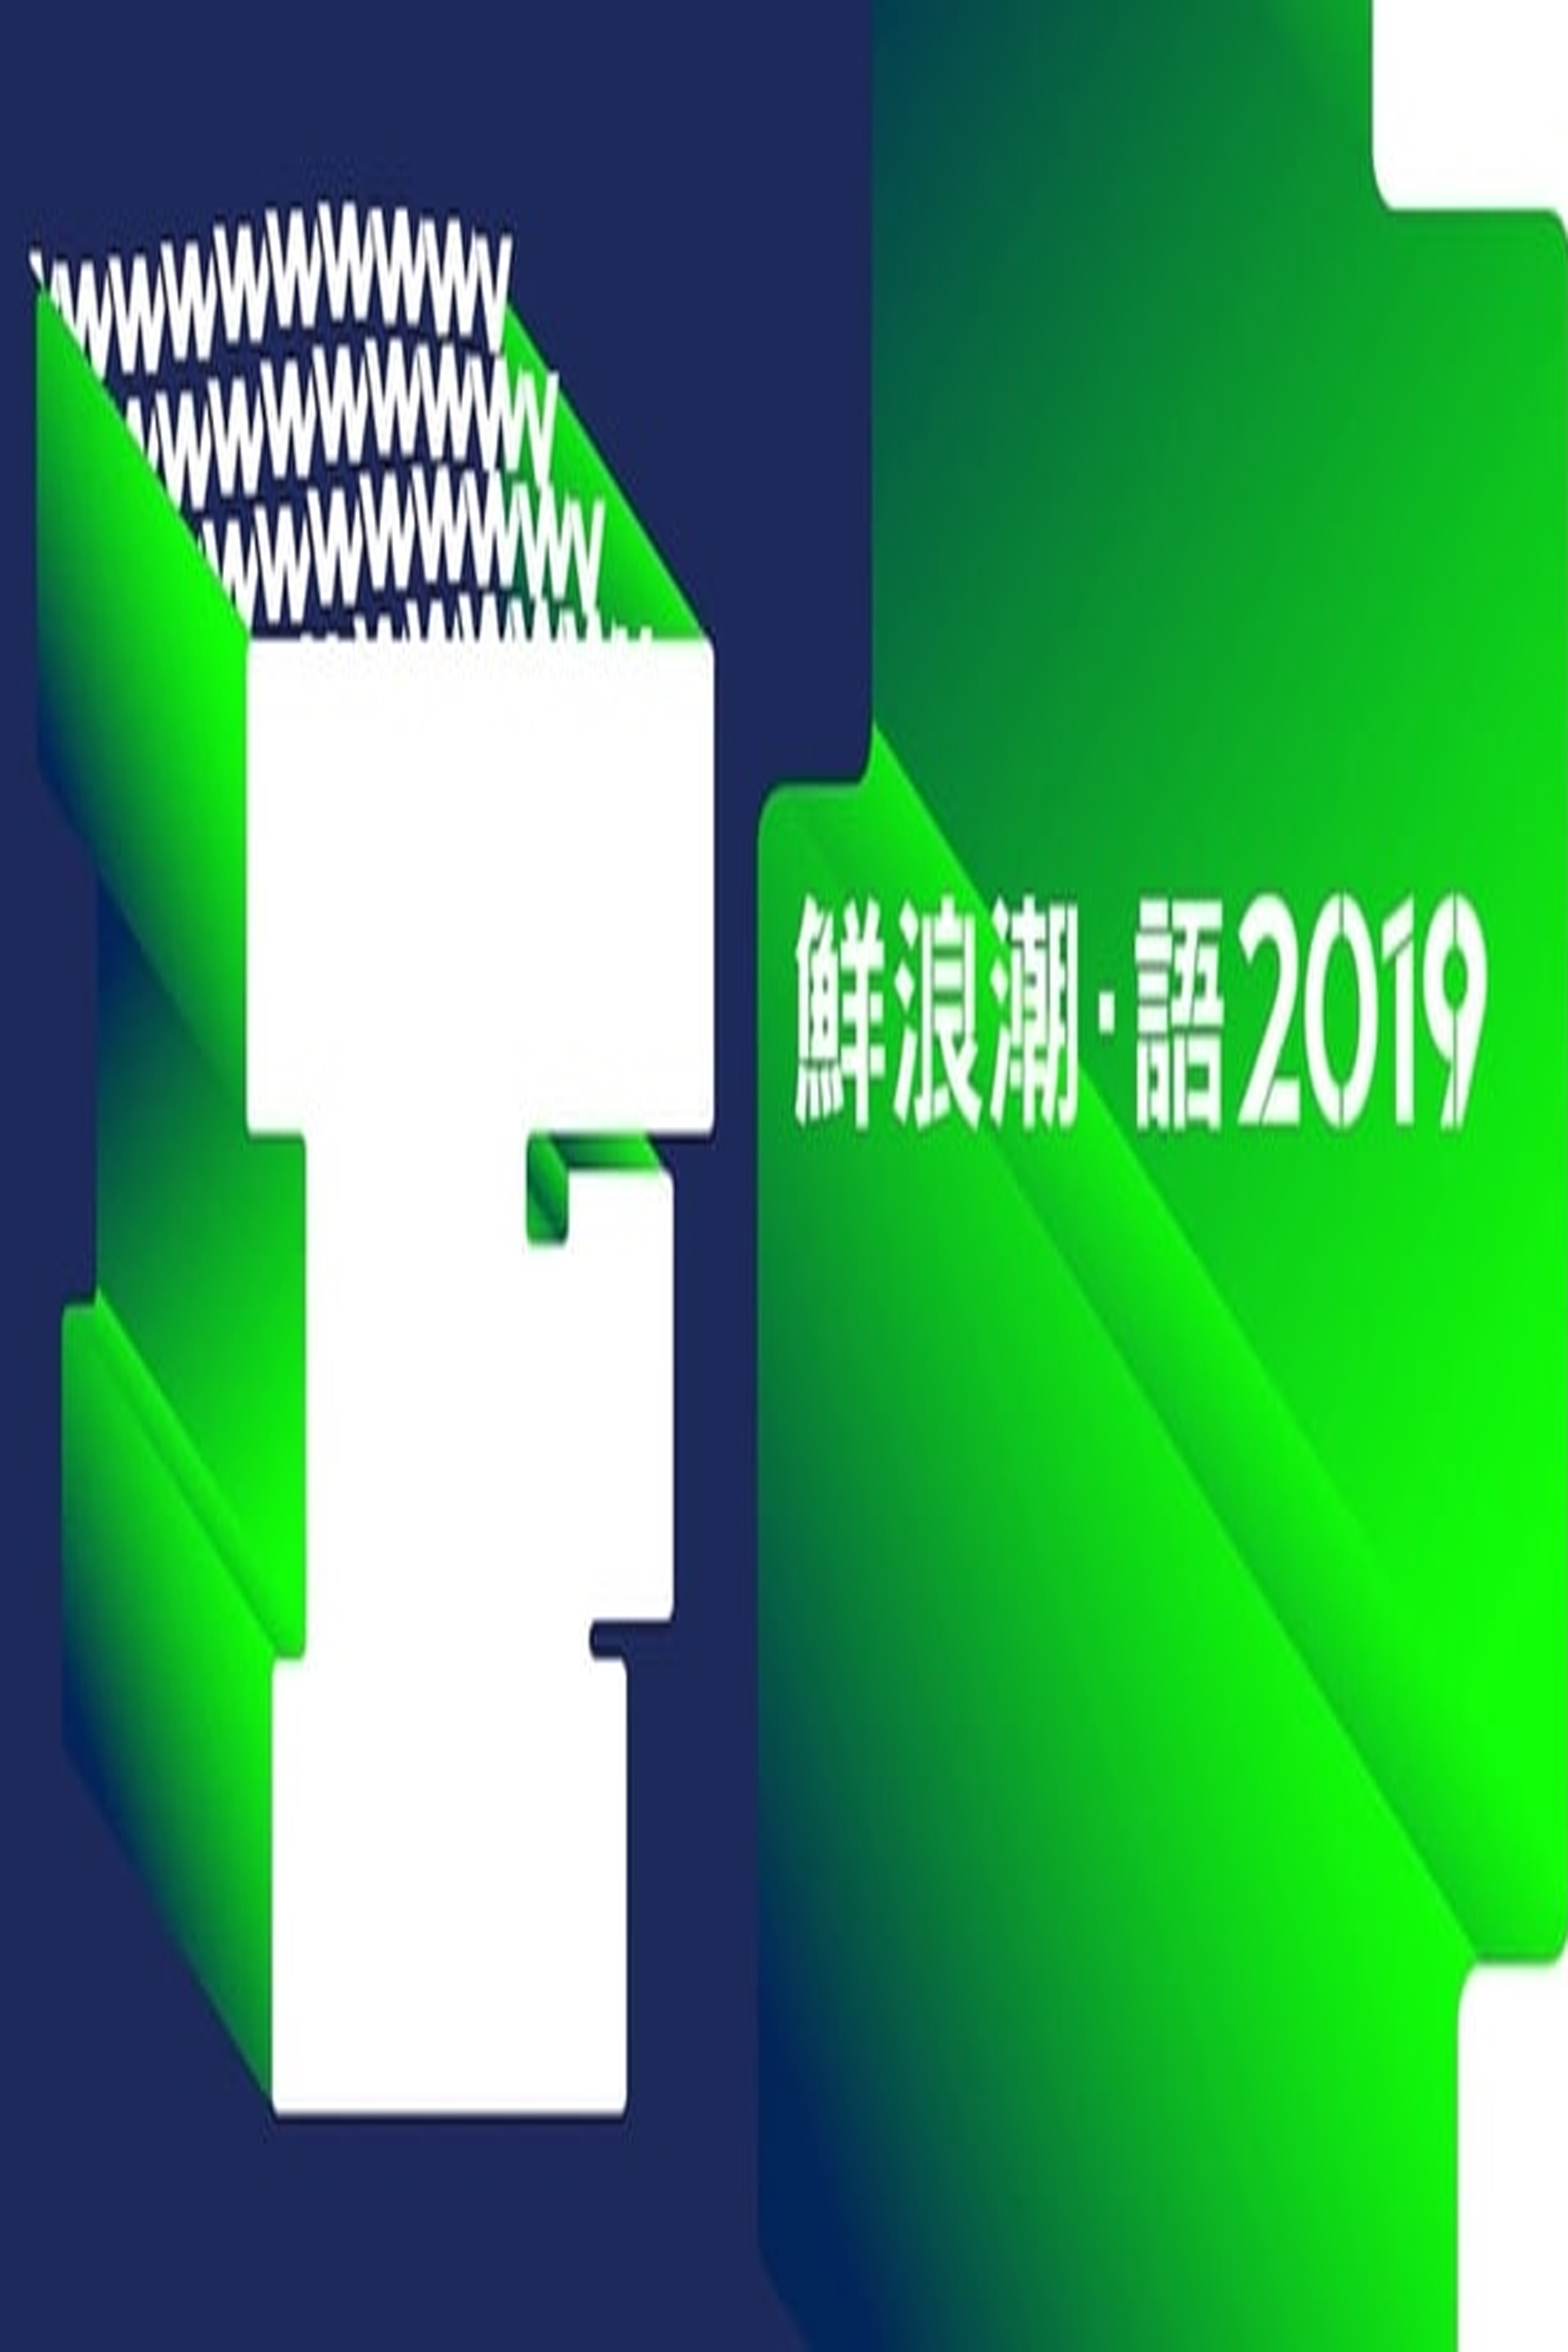 We are from Fresh Wave 2019 – 鮮浪潮‧語2019 – Episode 20